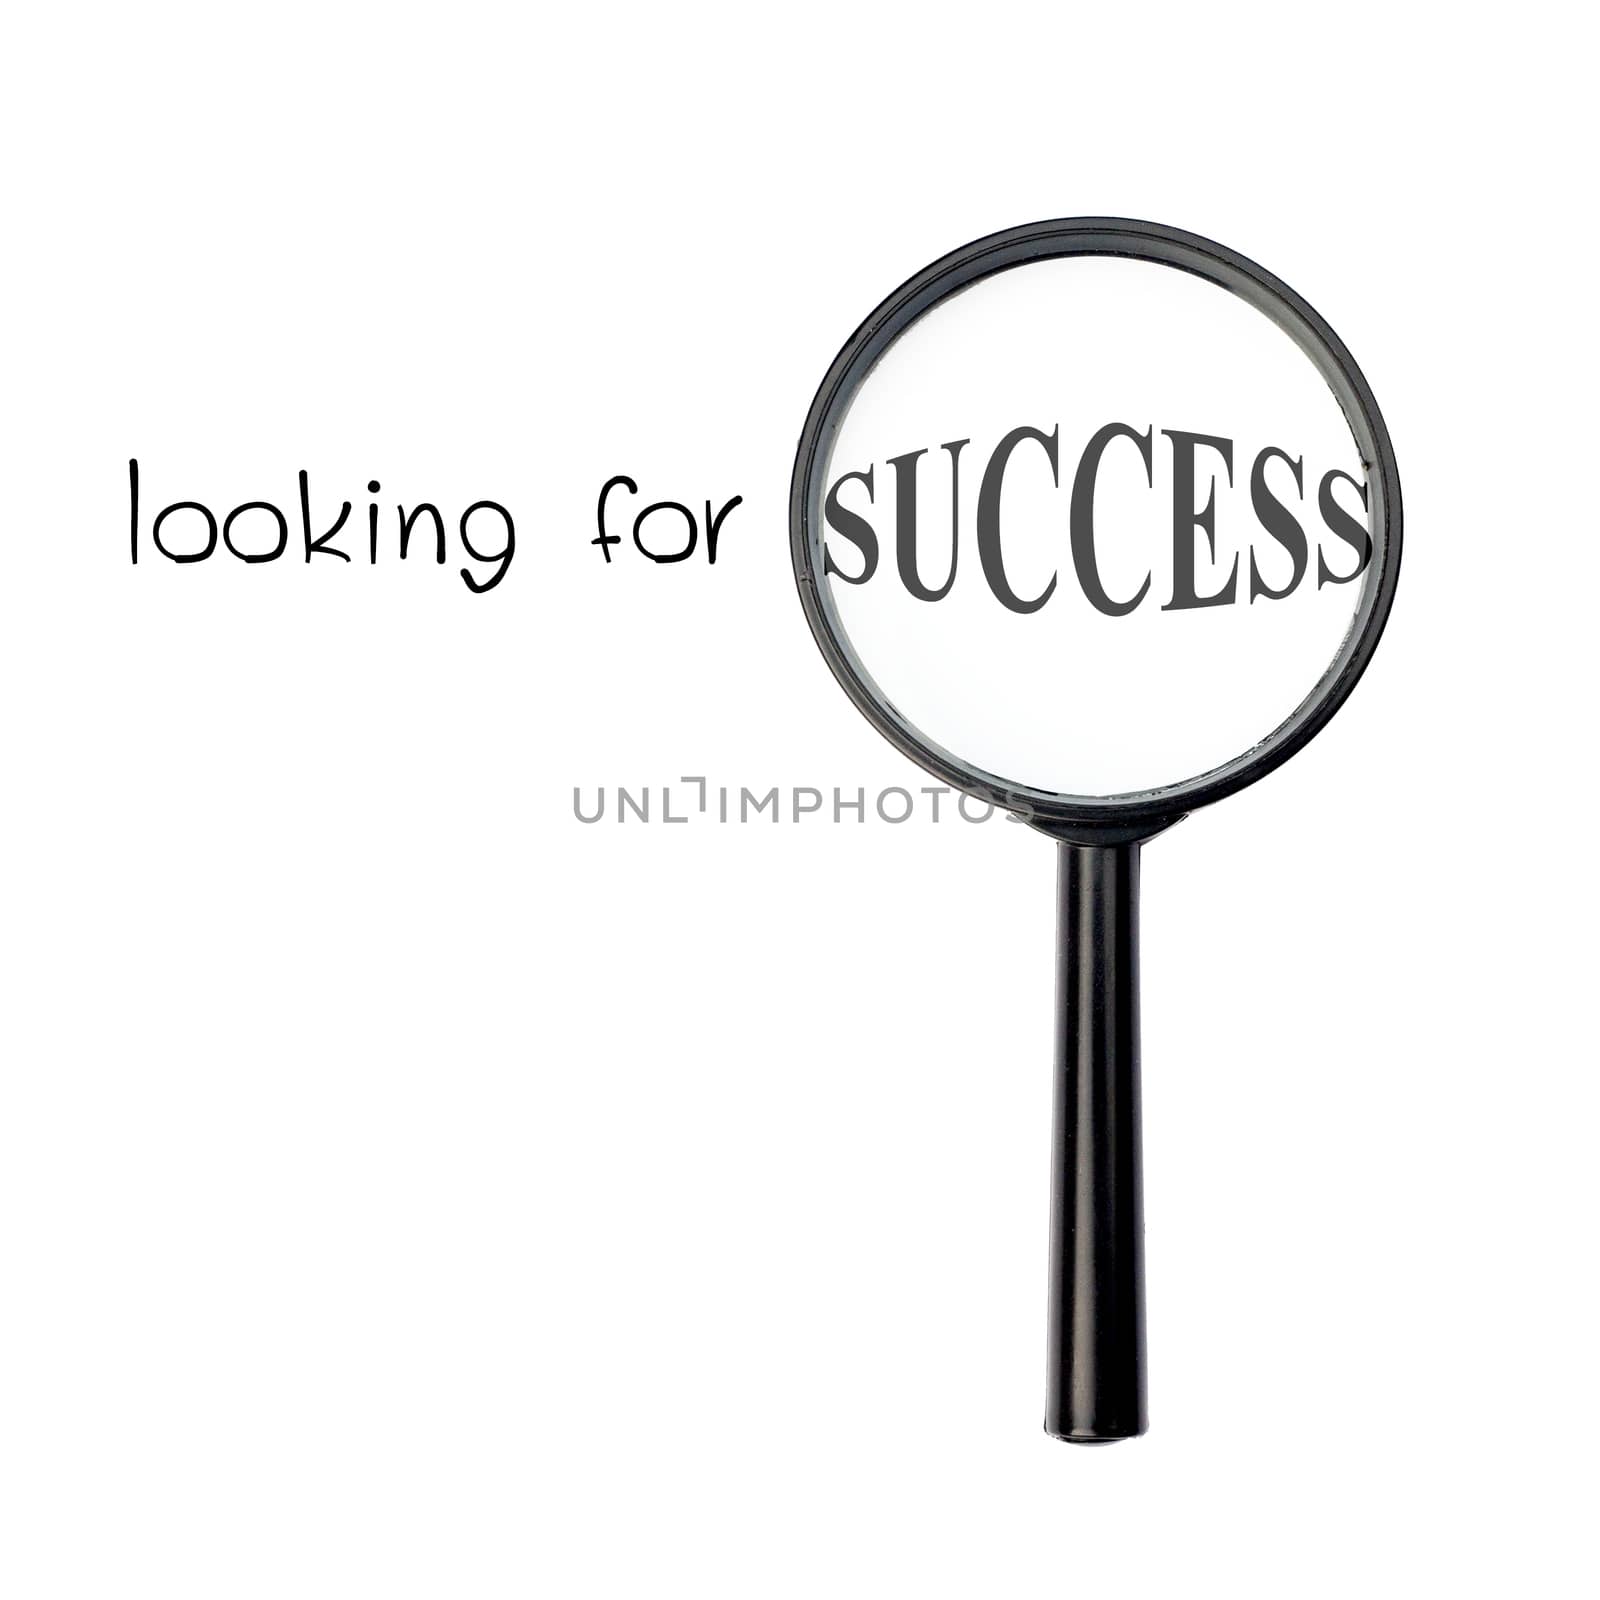 Looking for success with magnify glass isolated on white background